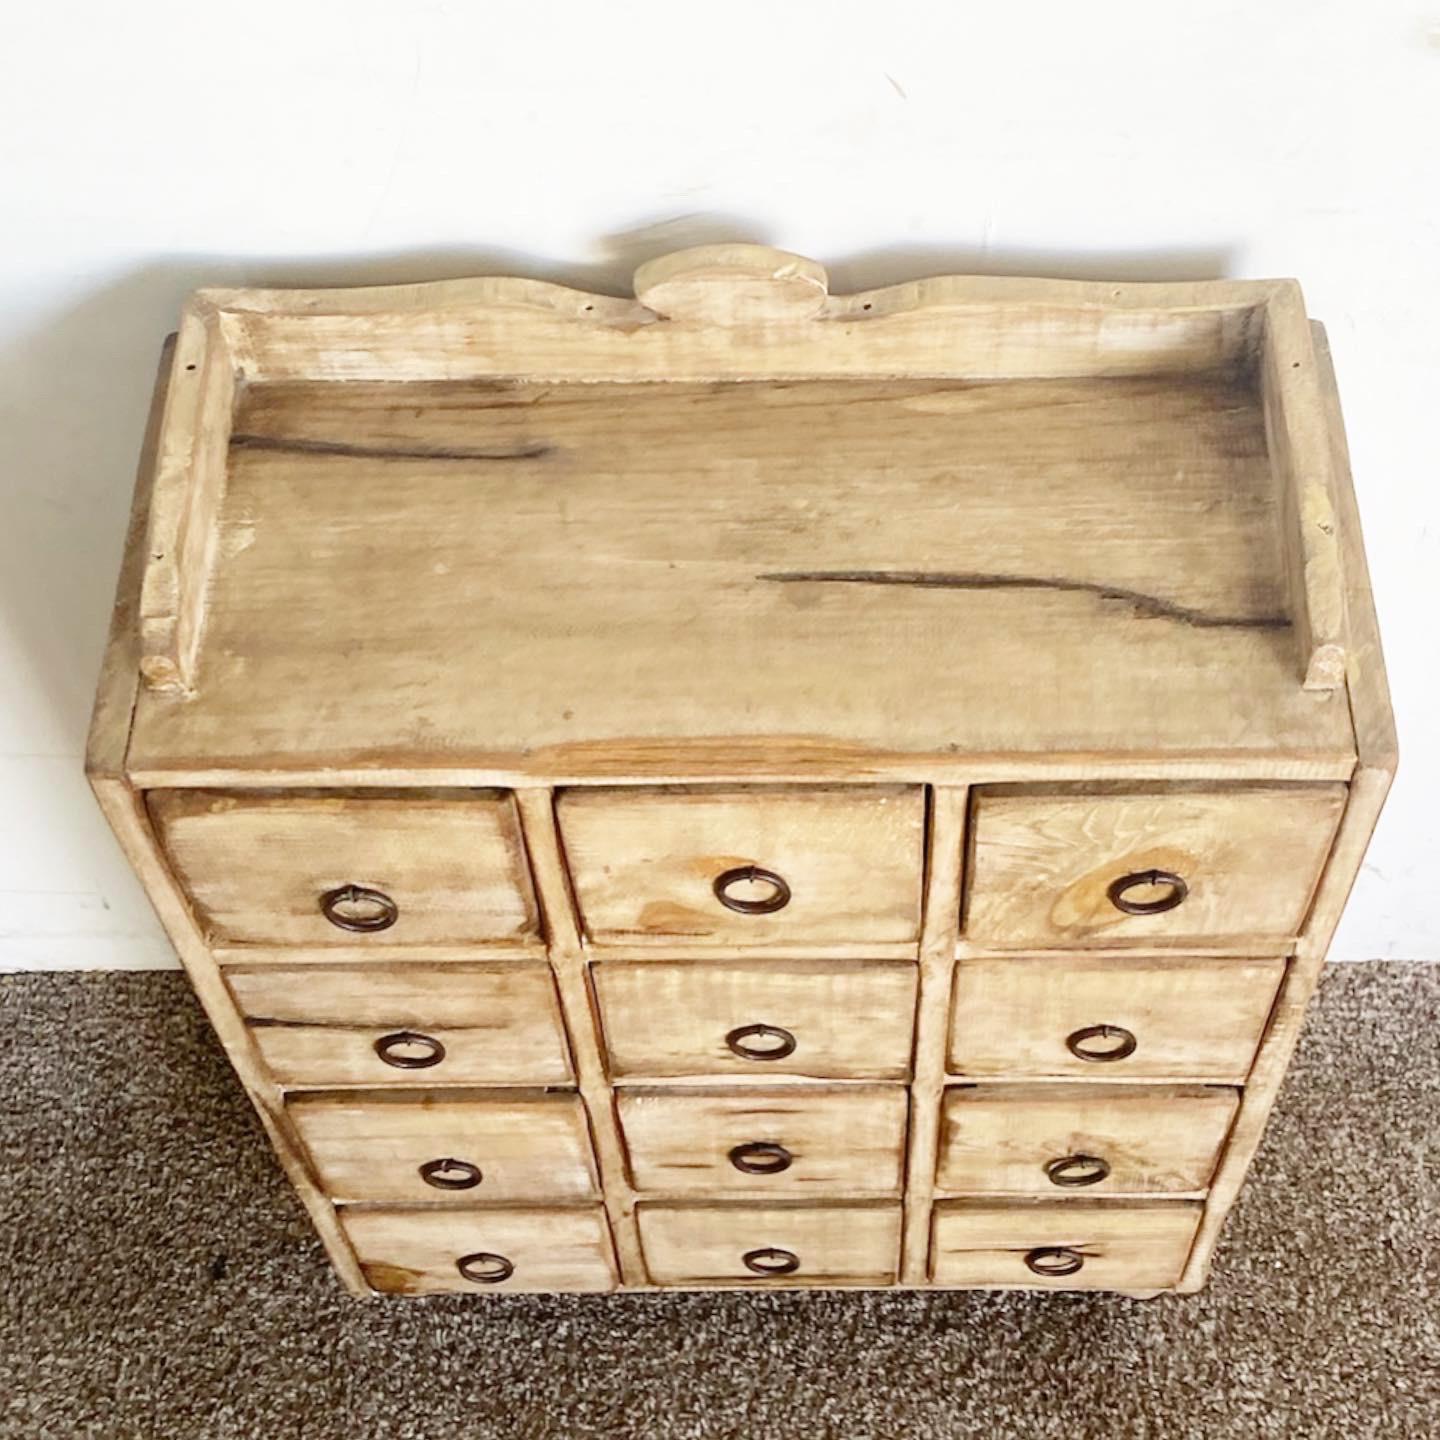 American Rustic Farmhouse Apothecary Chest of Drawers - 12 Drawers